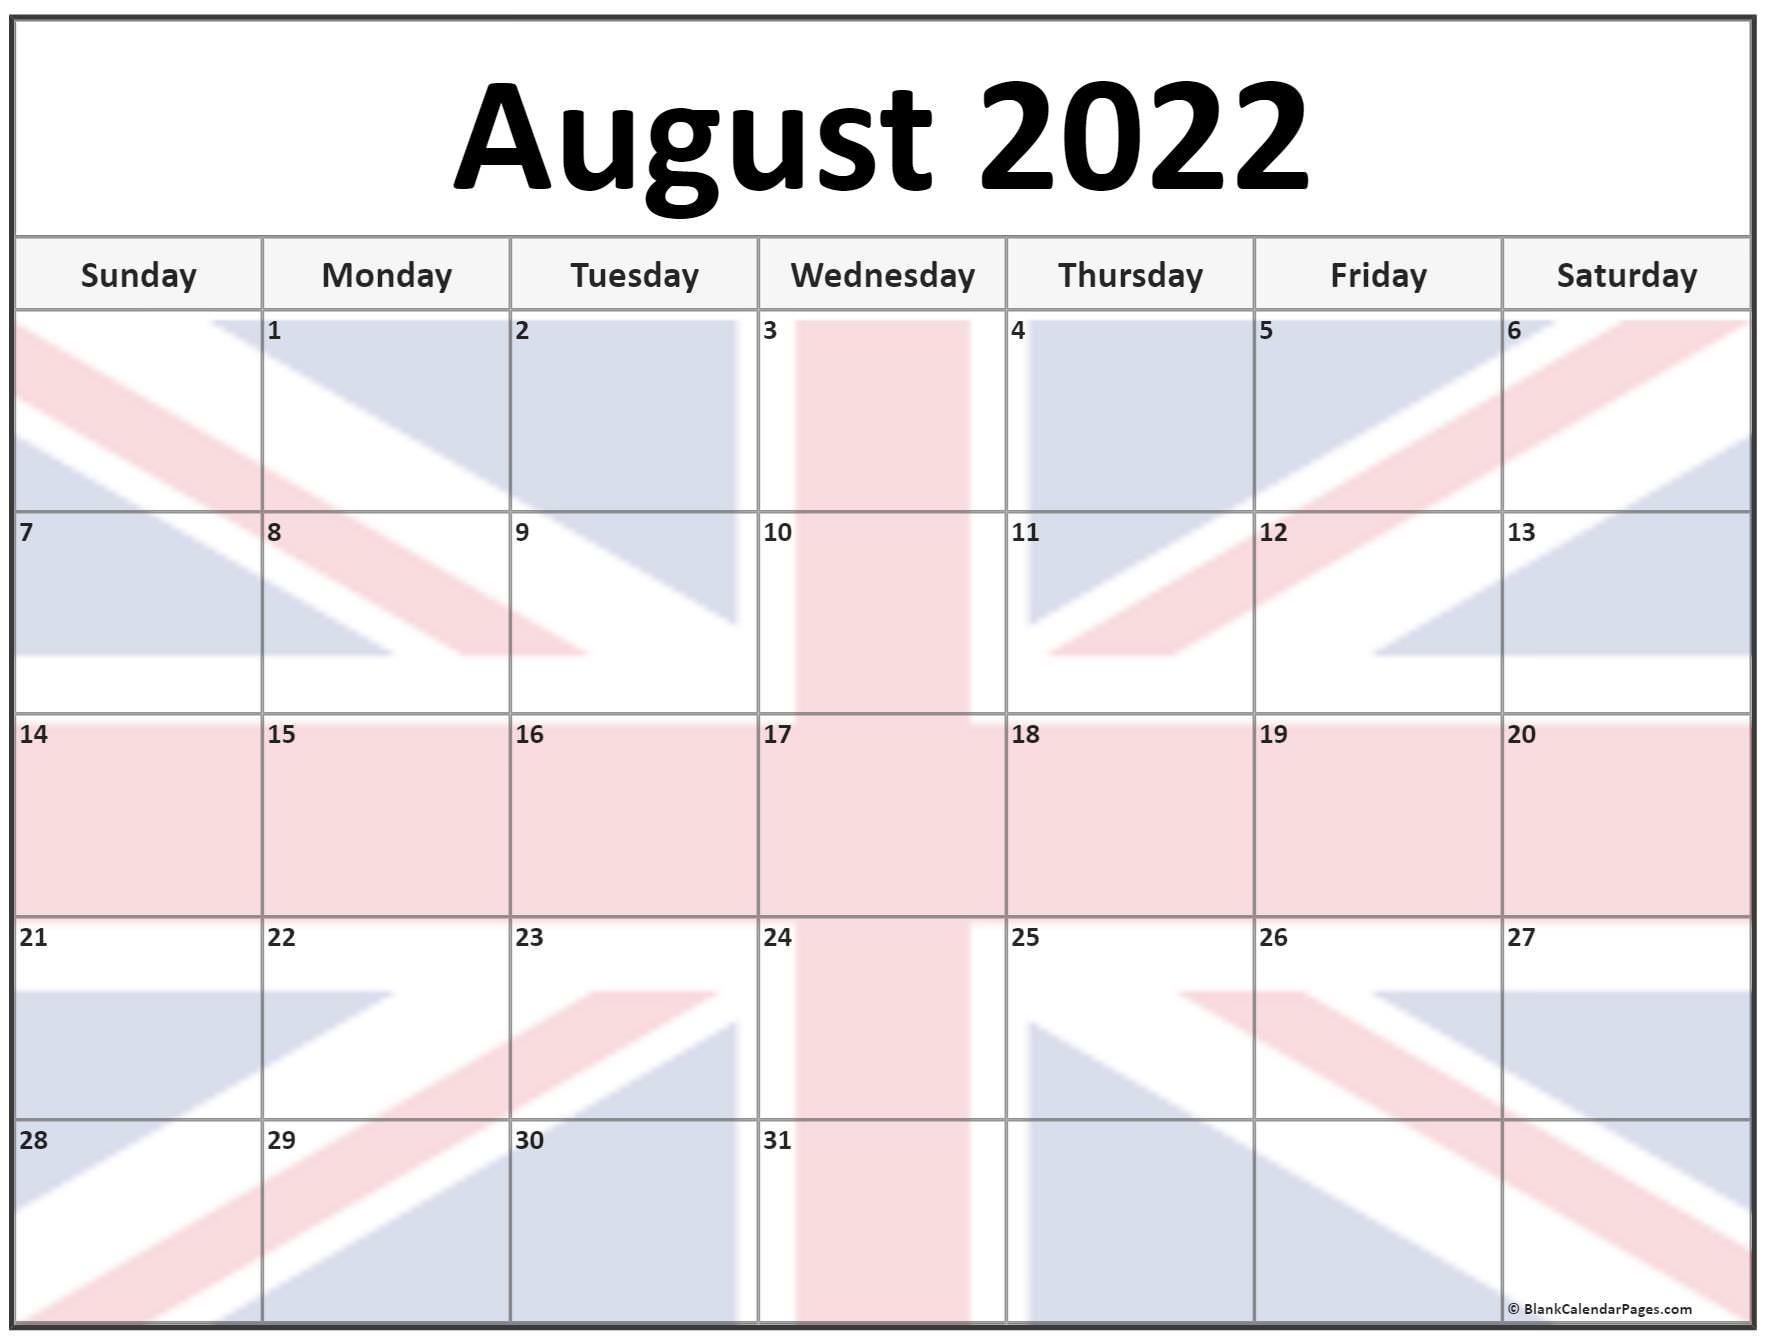 Collection Of August 2022 Photo Calendars With Image Filters.